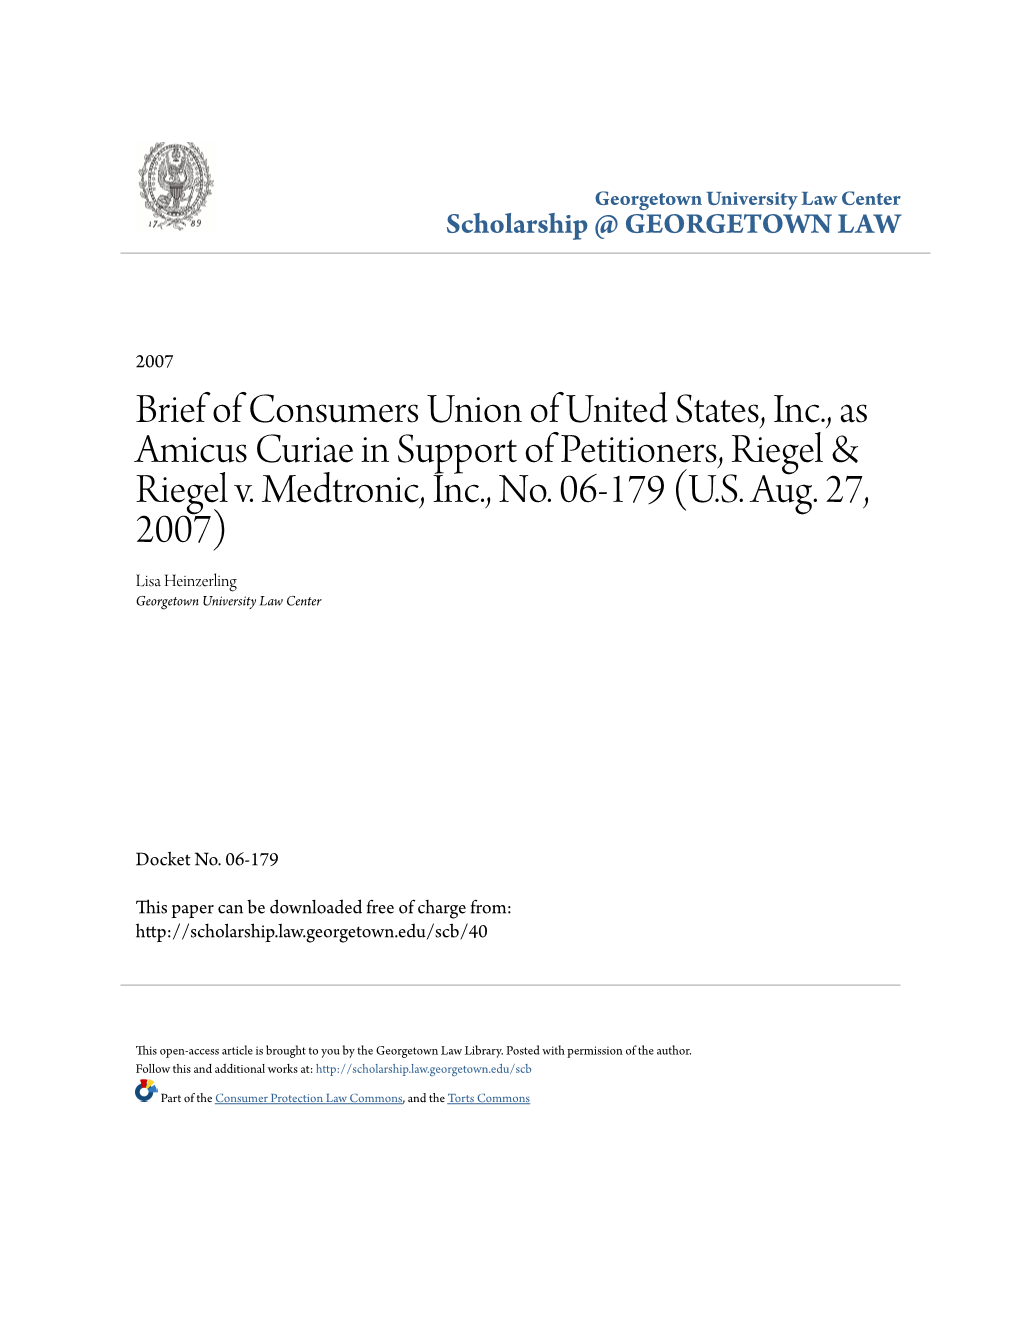 Brief of Consumers Union of United States, Inc., As Amicus Curiae in Support of Petitioners, Riegel & Riegel V